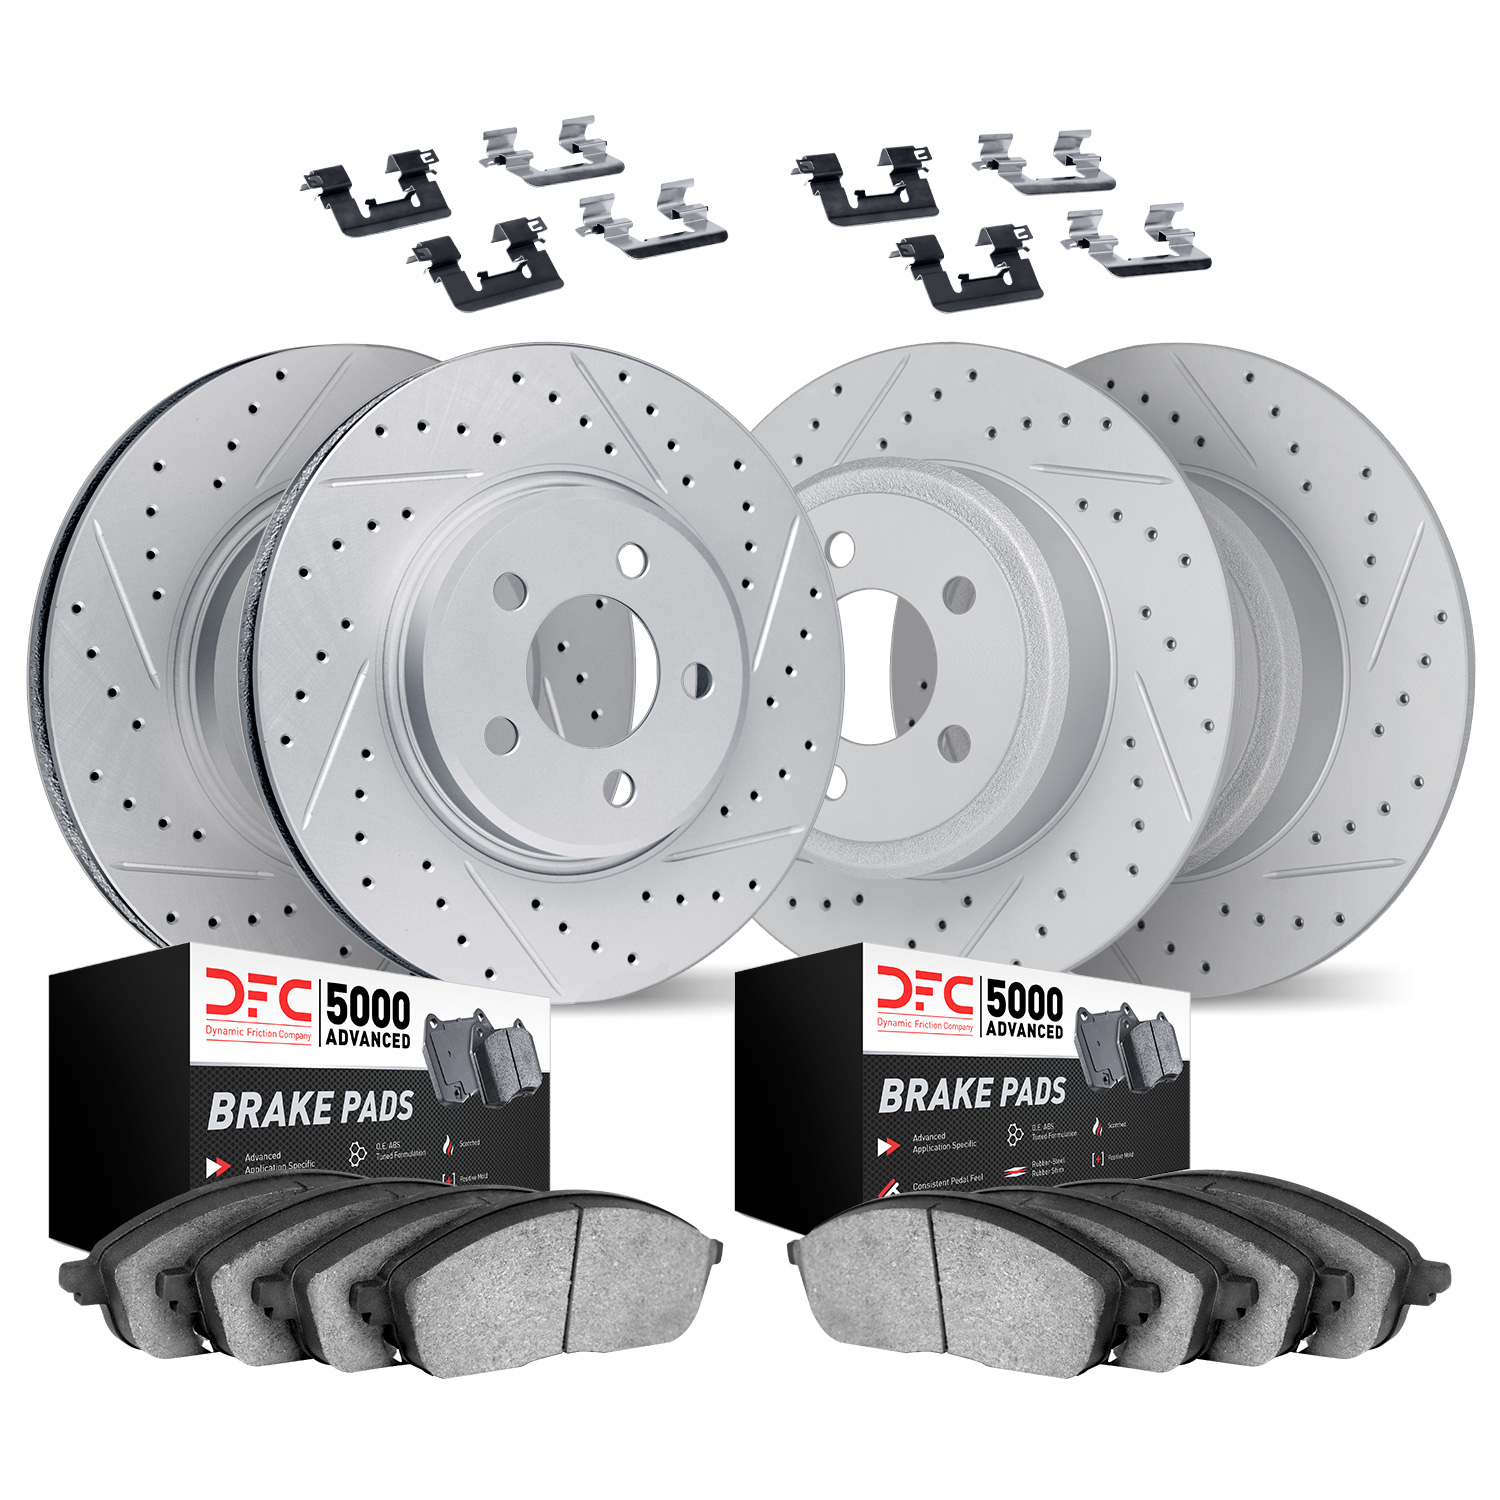 2514-13011 Geoperformance Drilled/Slotted Rotors w/5000 Advanced Brake Pads Kit & Hardware, Fits Select Subaru, Position: Front